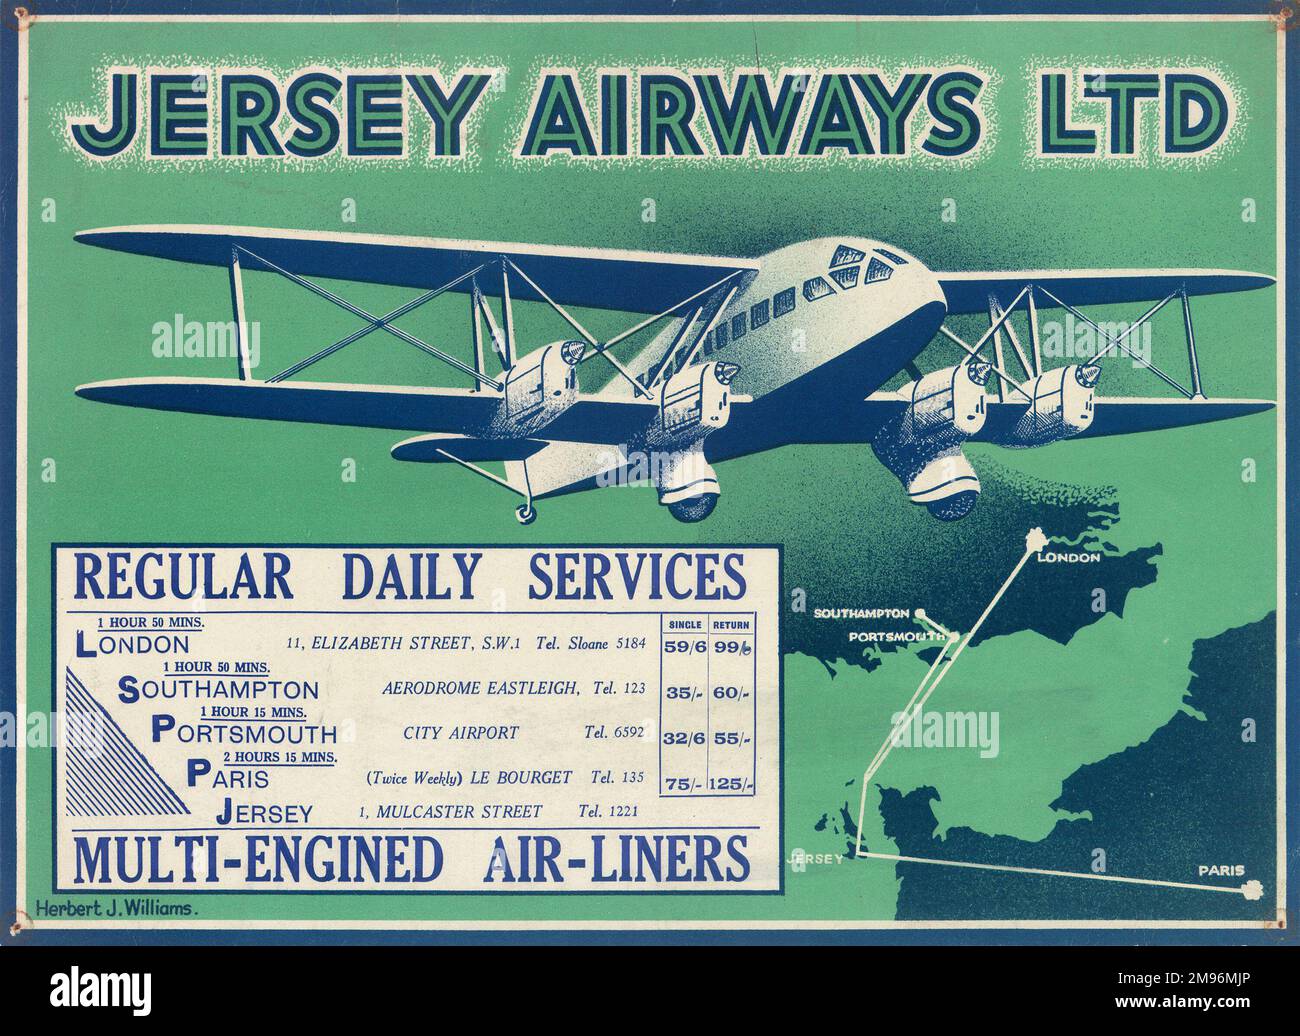 Poster, Jersey Airways Ltd, Regular Daily Services, Multi-Engined Air-Liners.  Showing a De Havilland biplane with a map below. Stock Photo